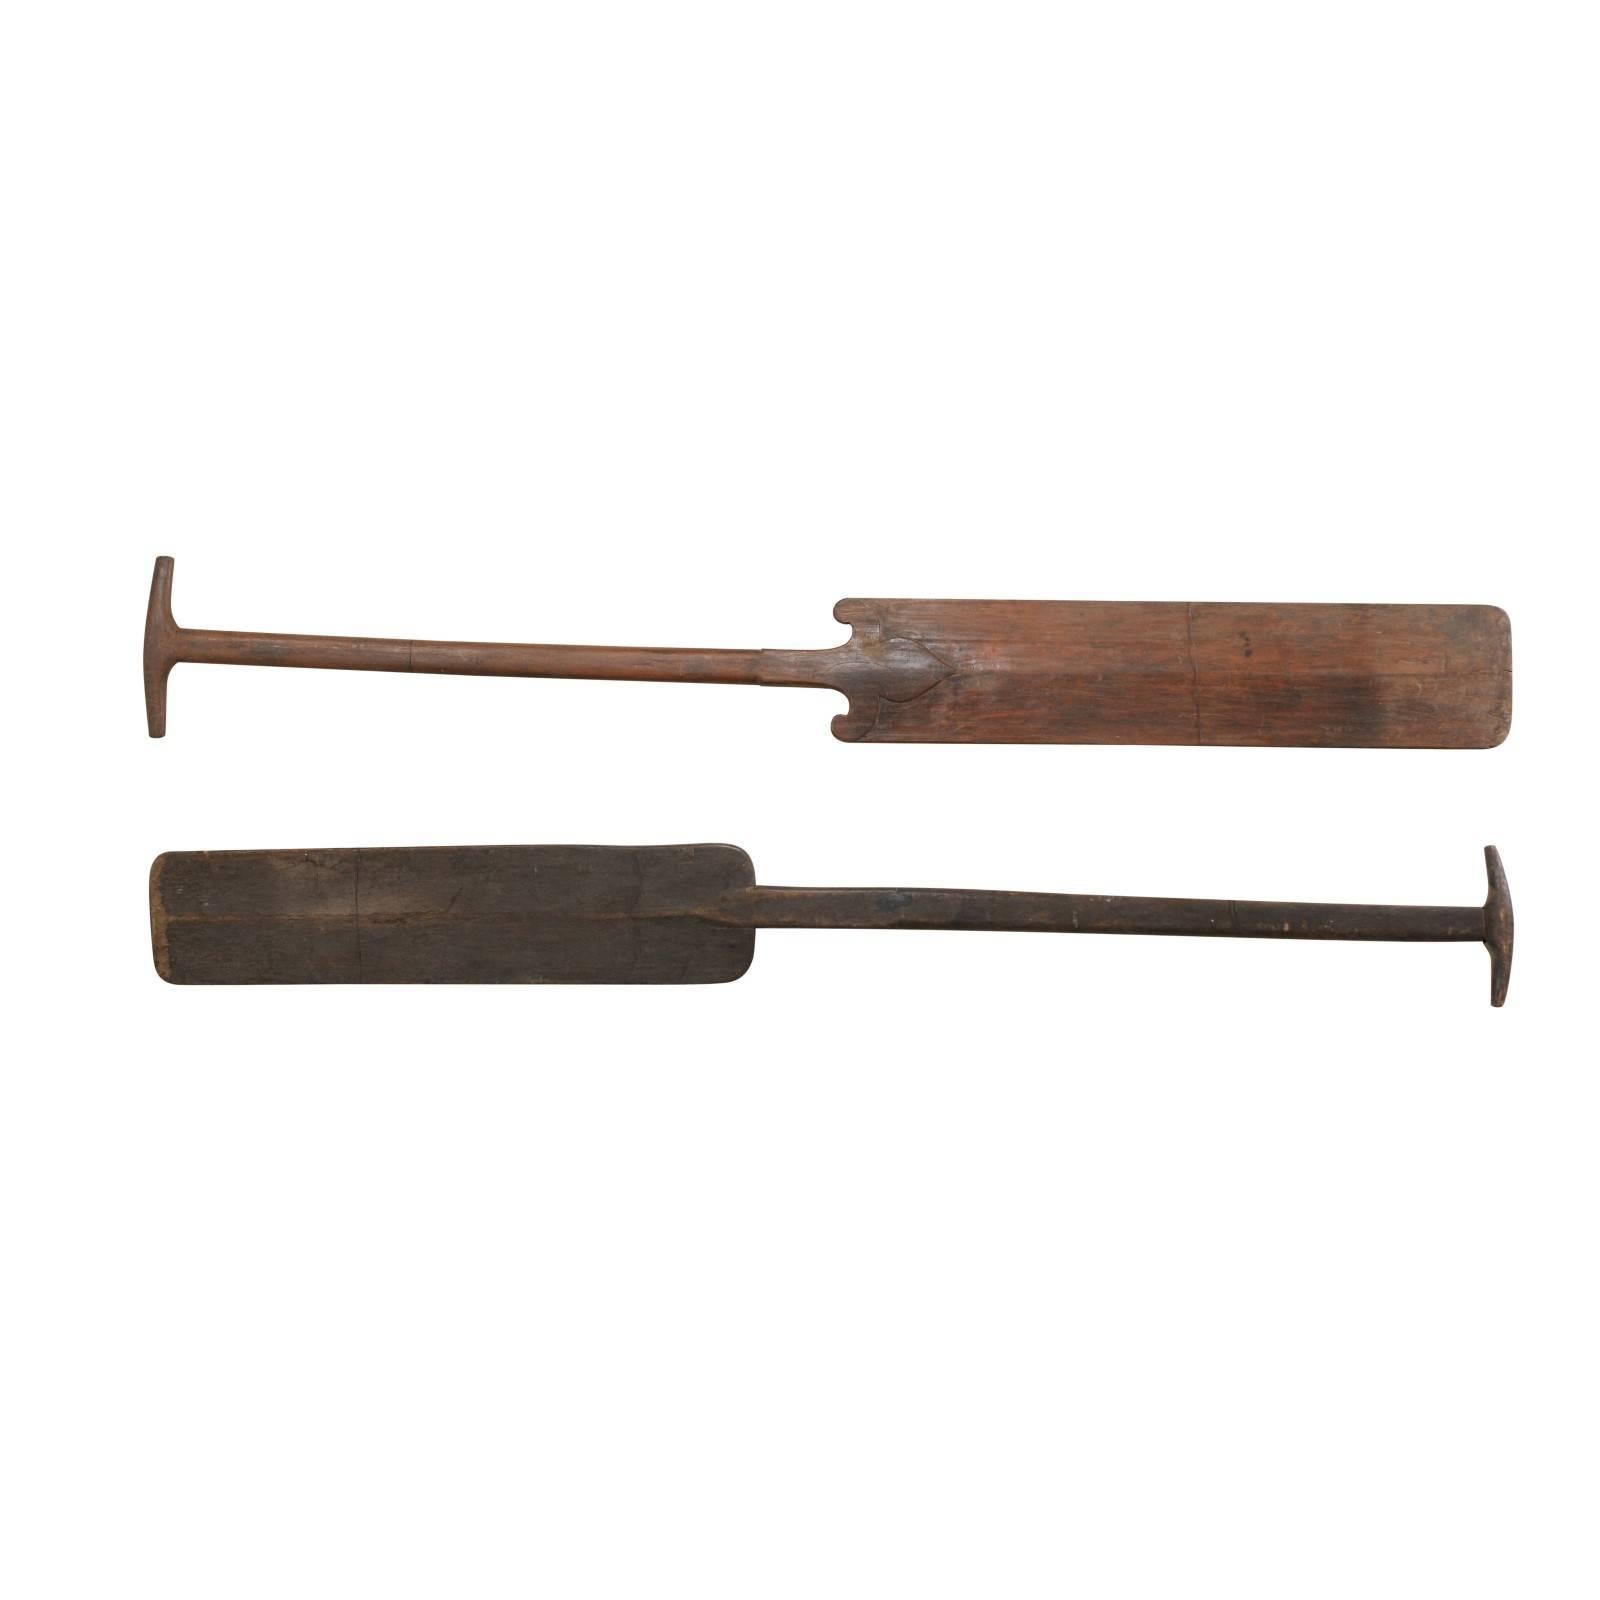 Pair Mid-20th C. Boat Steering Paddles from Kerala, South India (11+ Ft Long!)